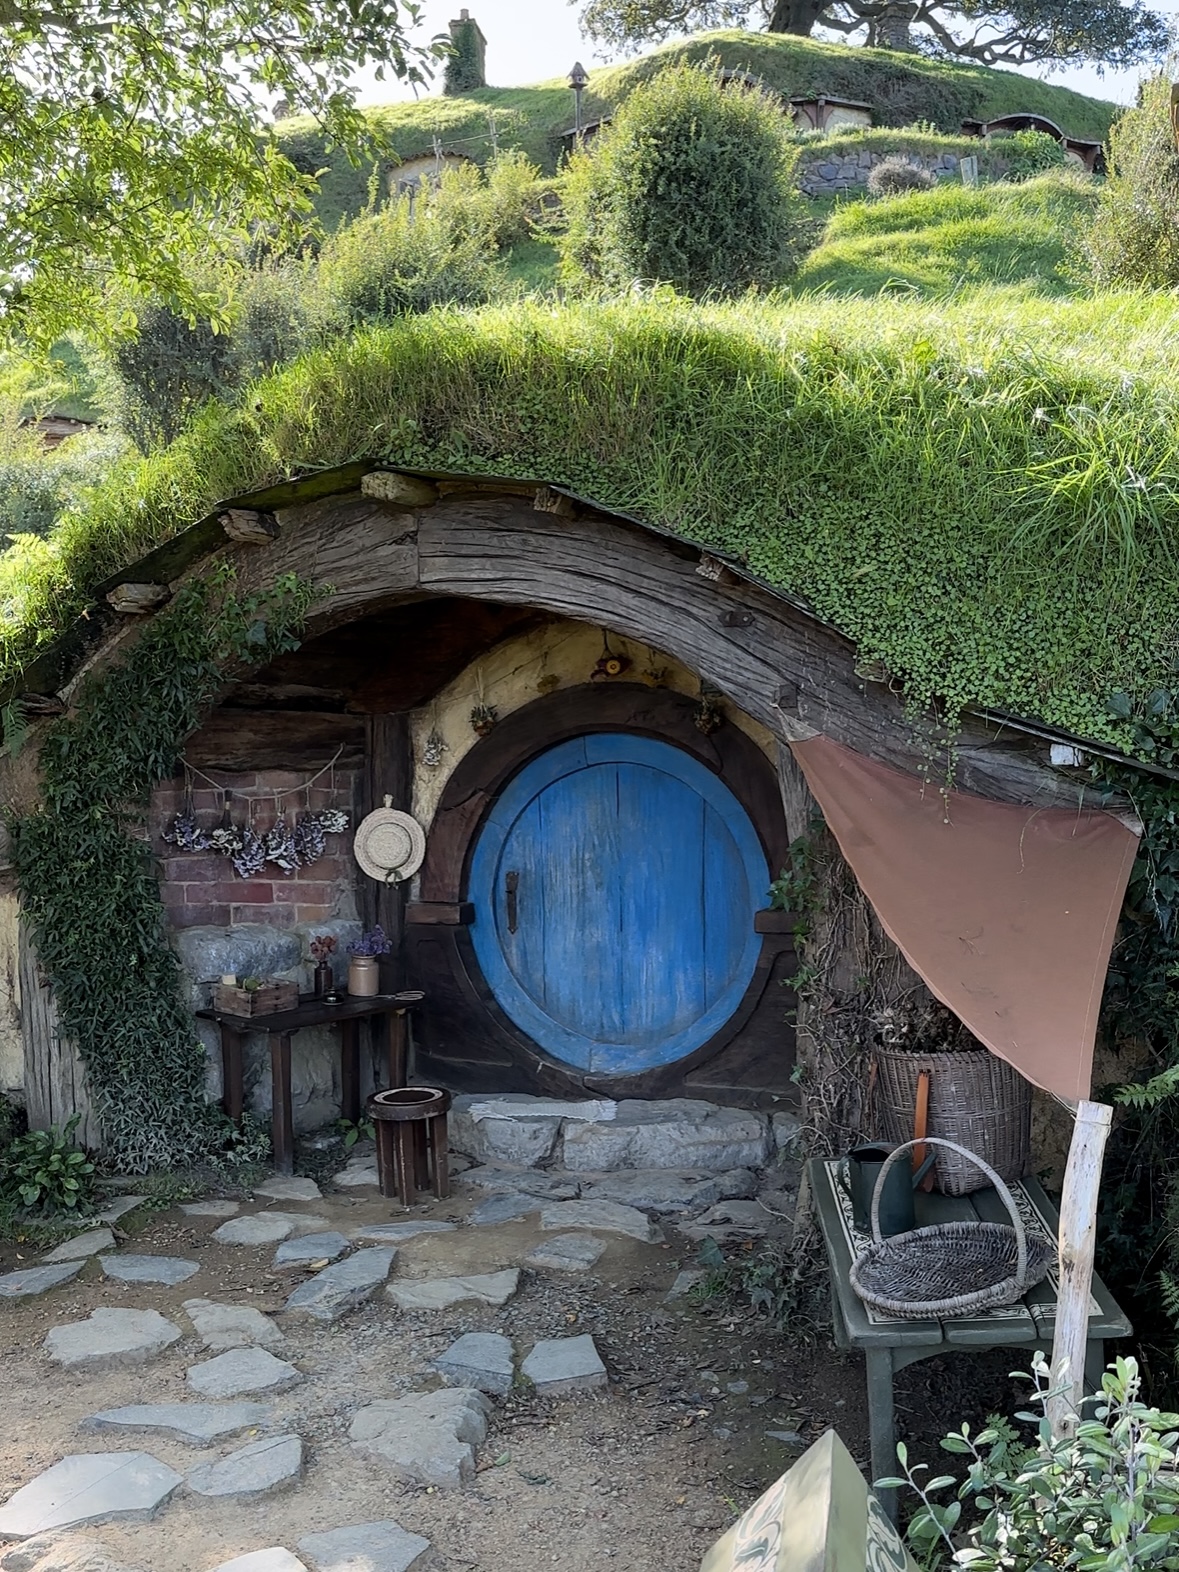 A blue hobbit hole on the set of Hobbiton in New Zealand